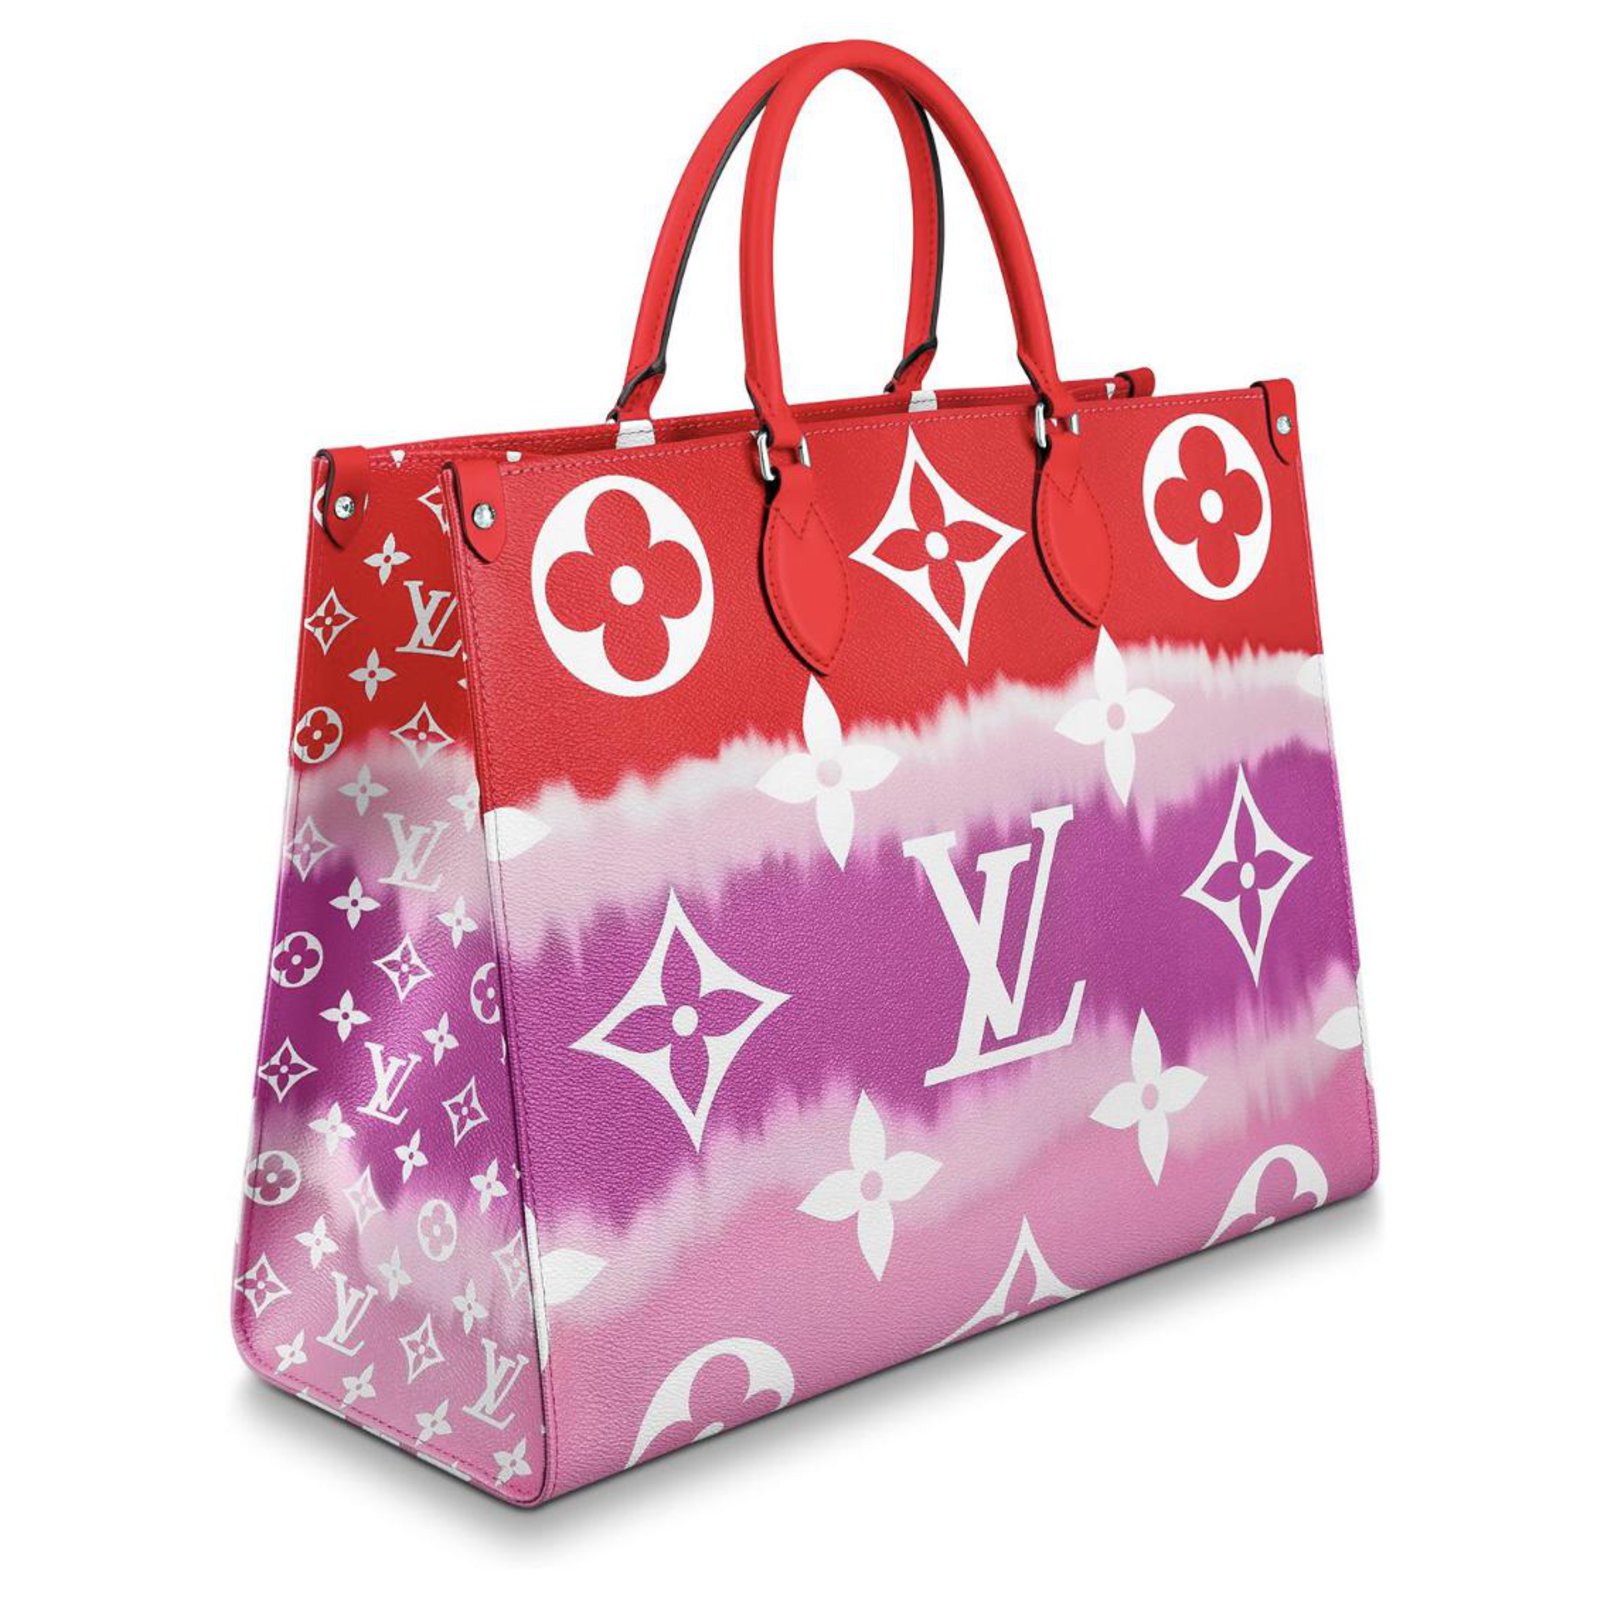 Tote w leather tote Louis Vuitton Red in Leather - 32209174